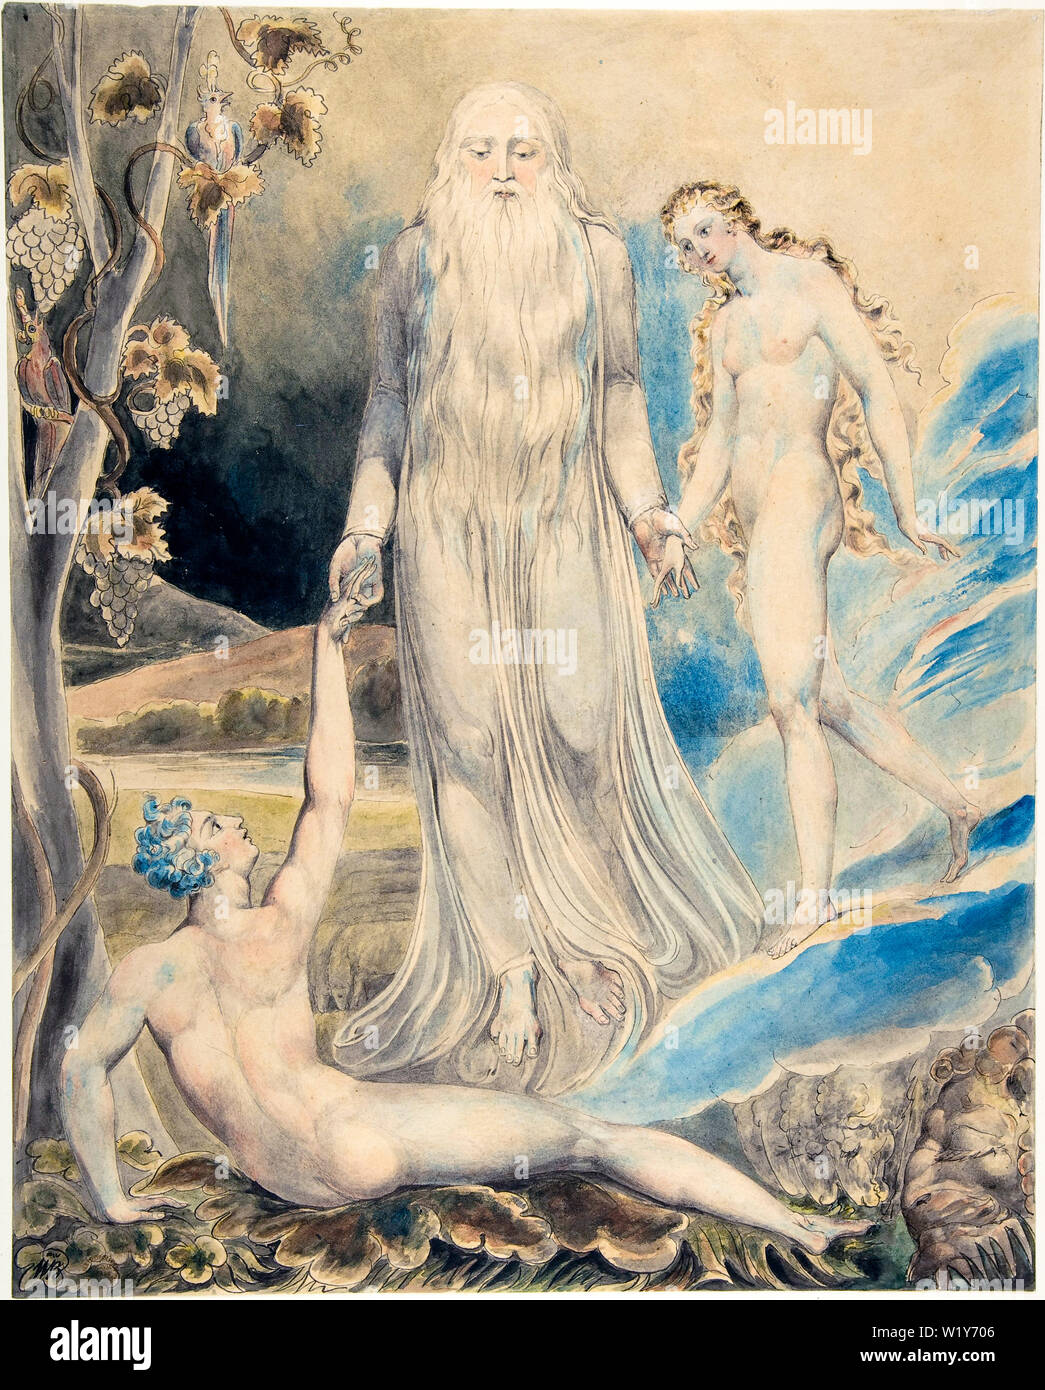 William Blake, Adam and Eve, Angel of the Divine Presence Bringing Eve to Adam, The Creation of Eve, watercolour painting over pen and ink, circa 1803-1805 Stock Photo